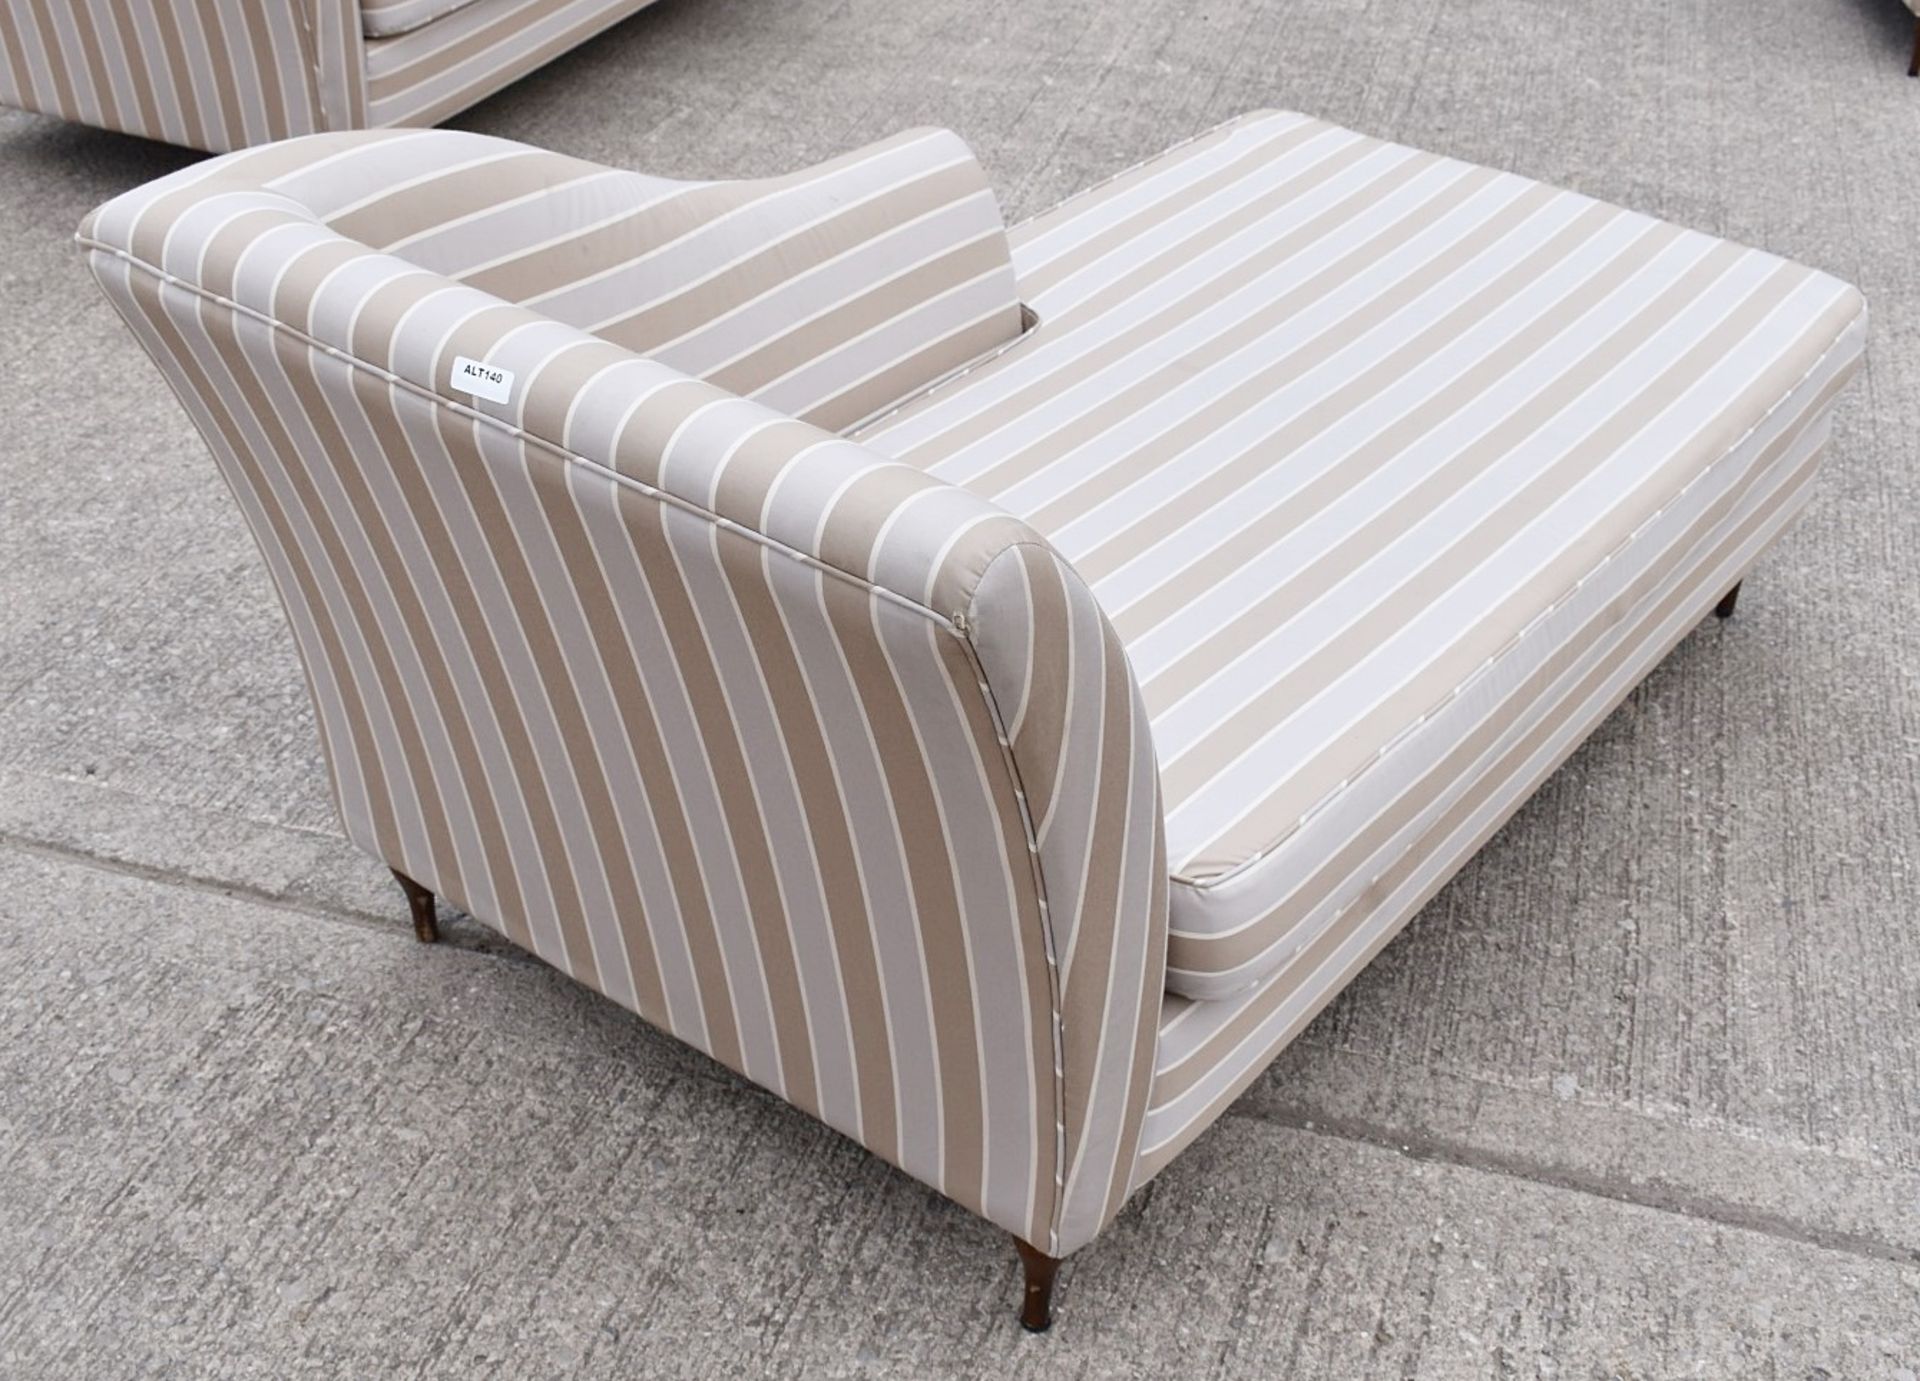 1 x Classically Styled Chaise Lounge Upholstered in a Premium Striped Fabric - Recently Procured - Image 2 of 3